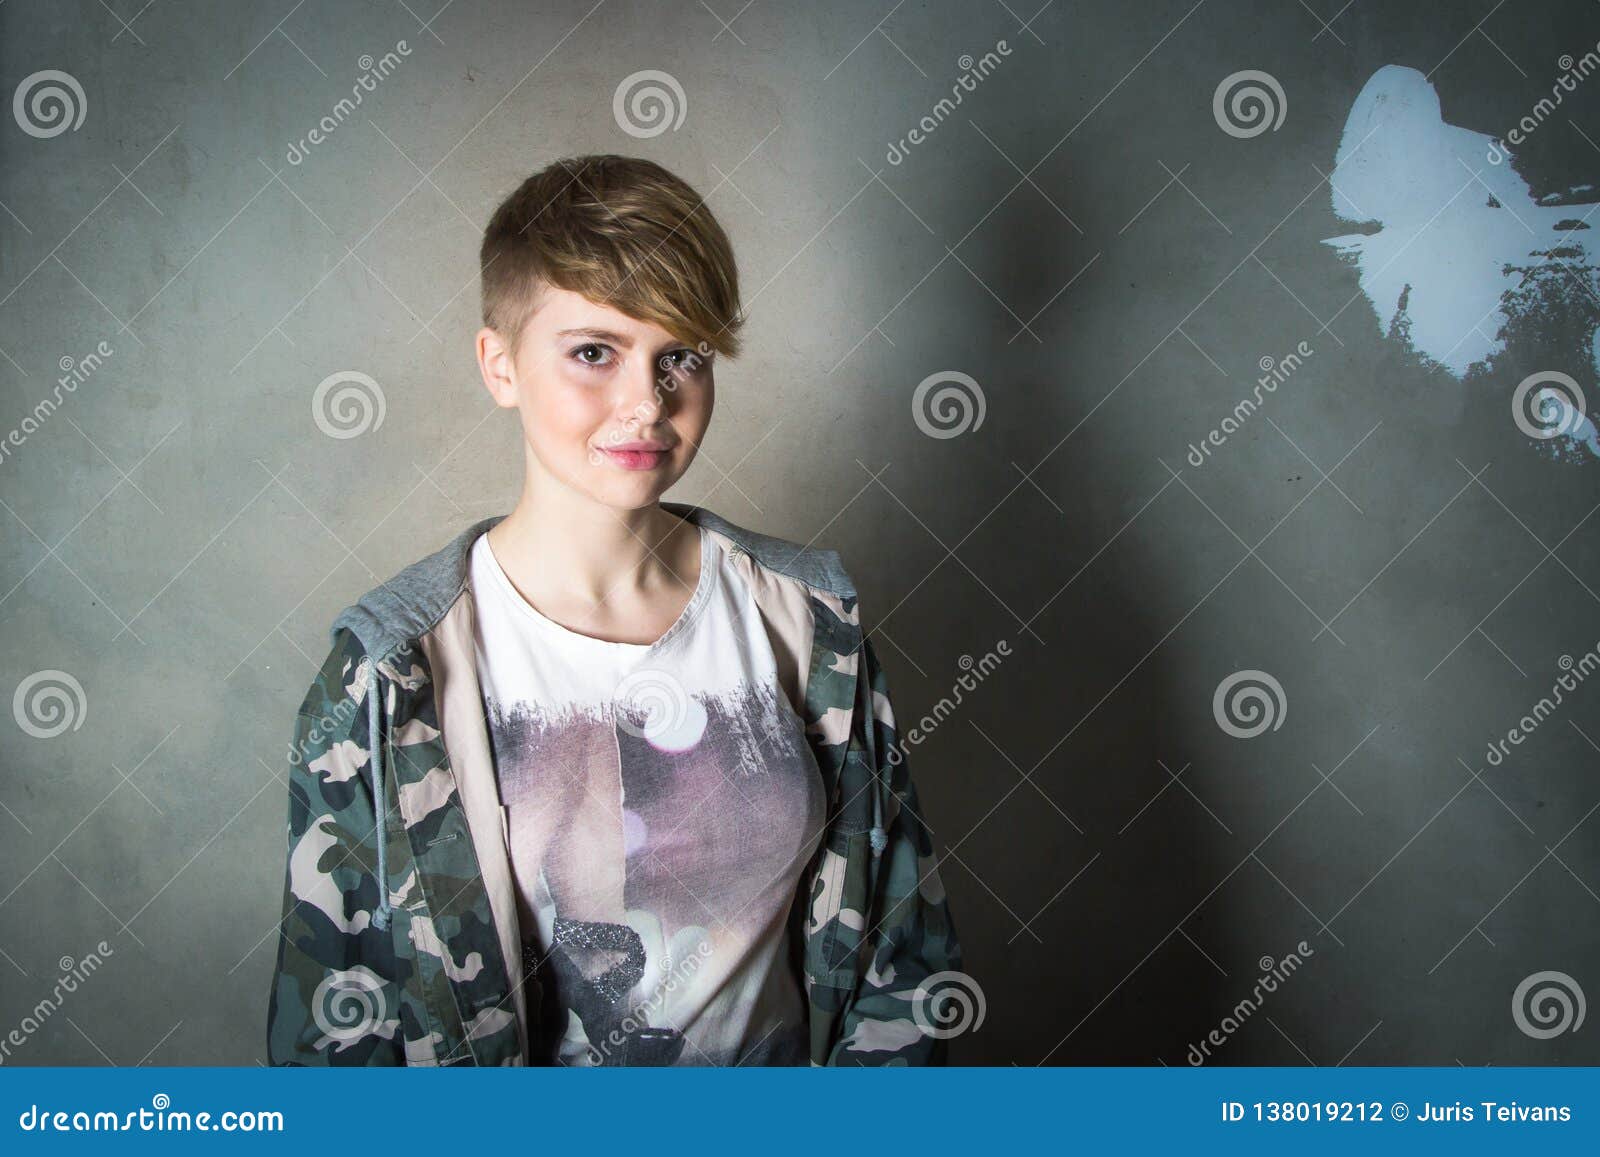 Young Girl With Short Haircut Concrete Wall On Background